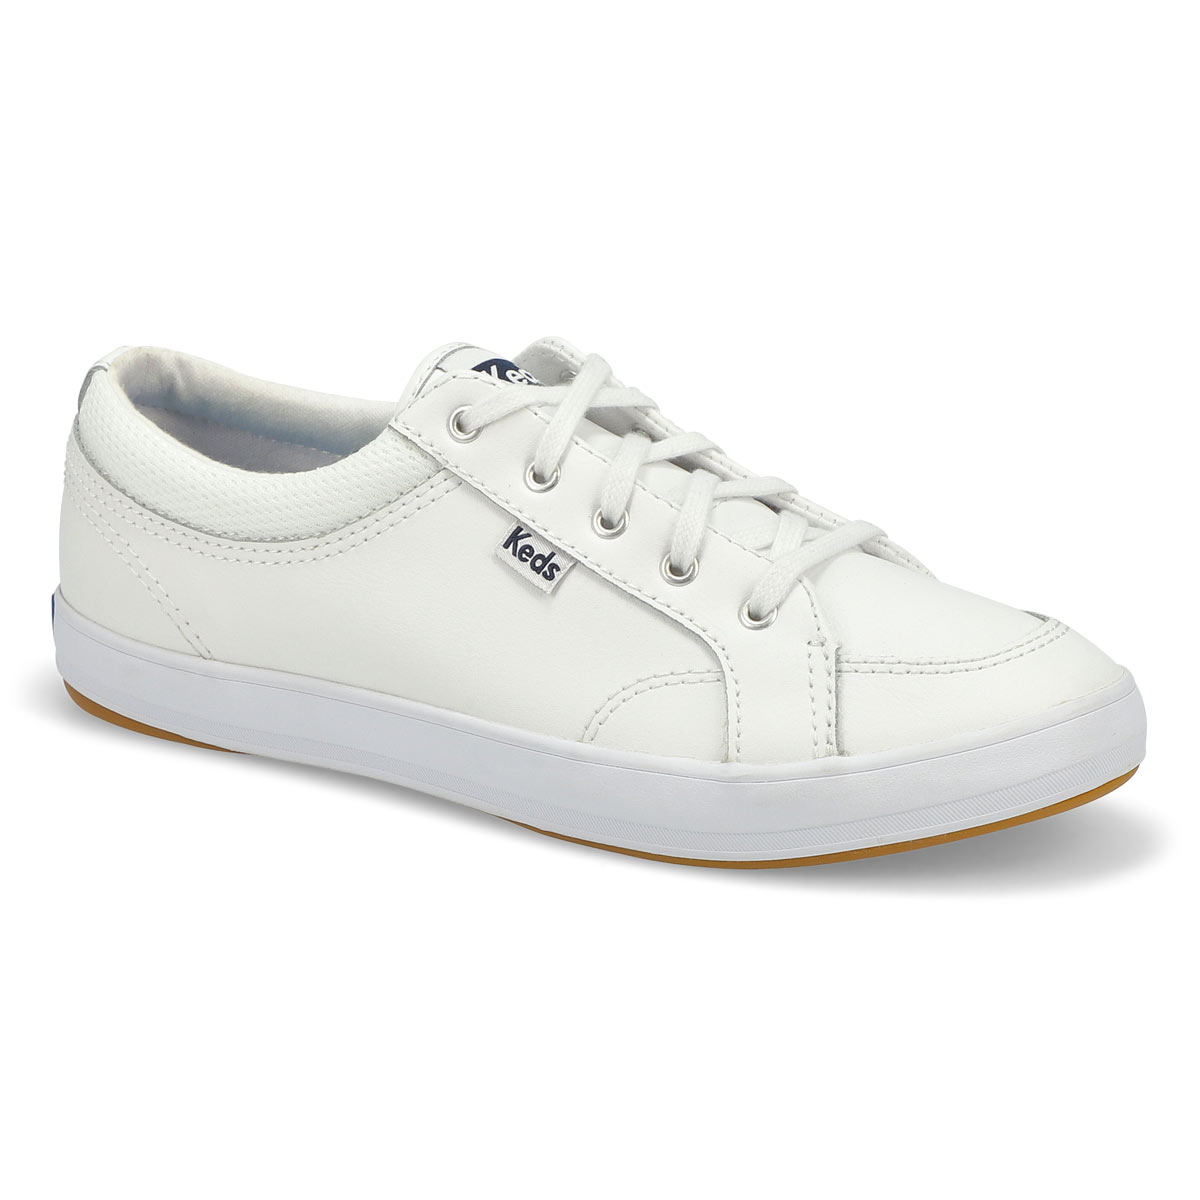 CENTER white lace up sneaker 